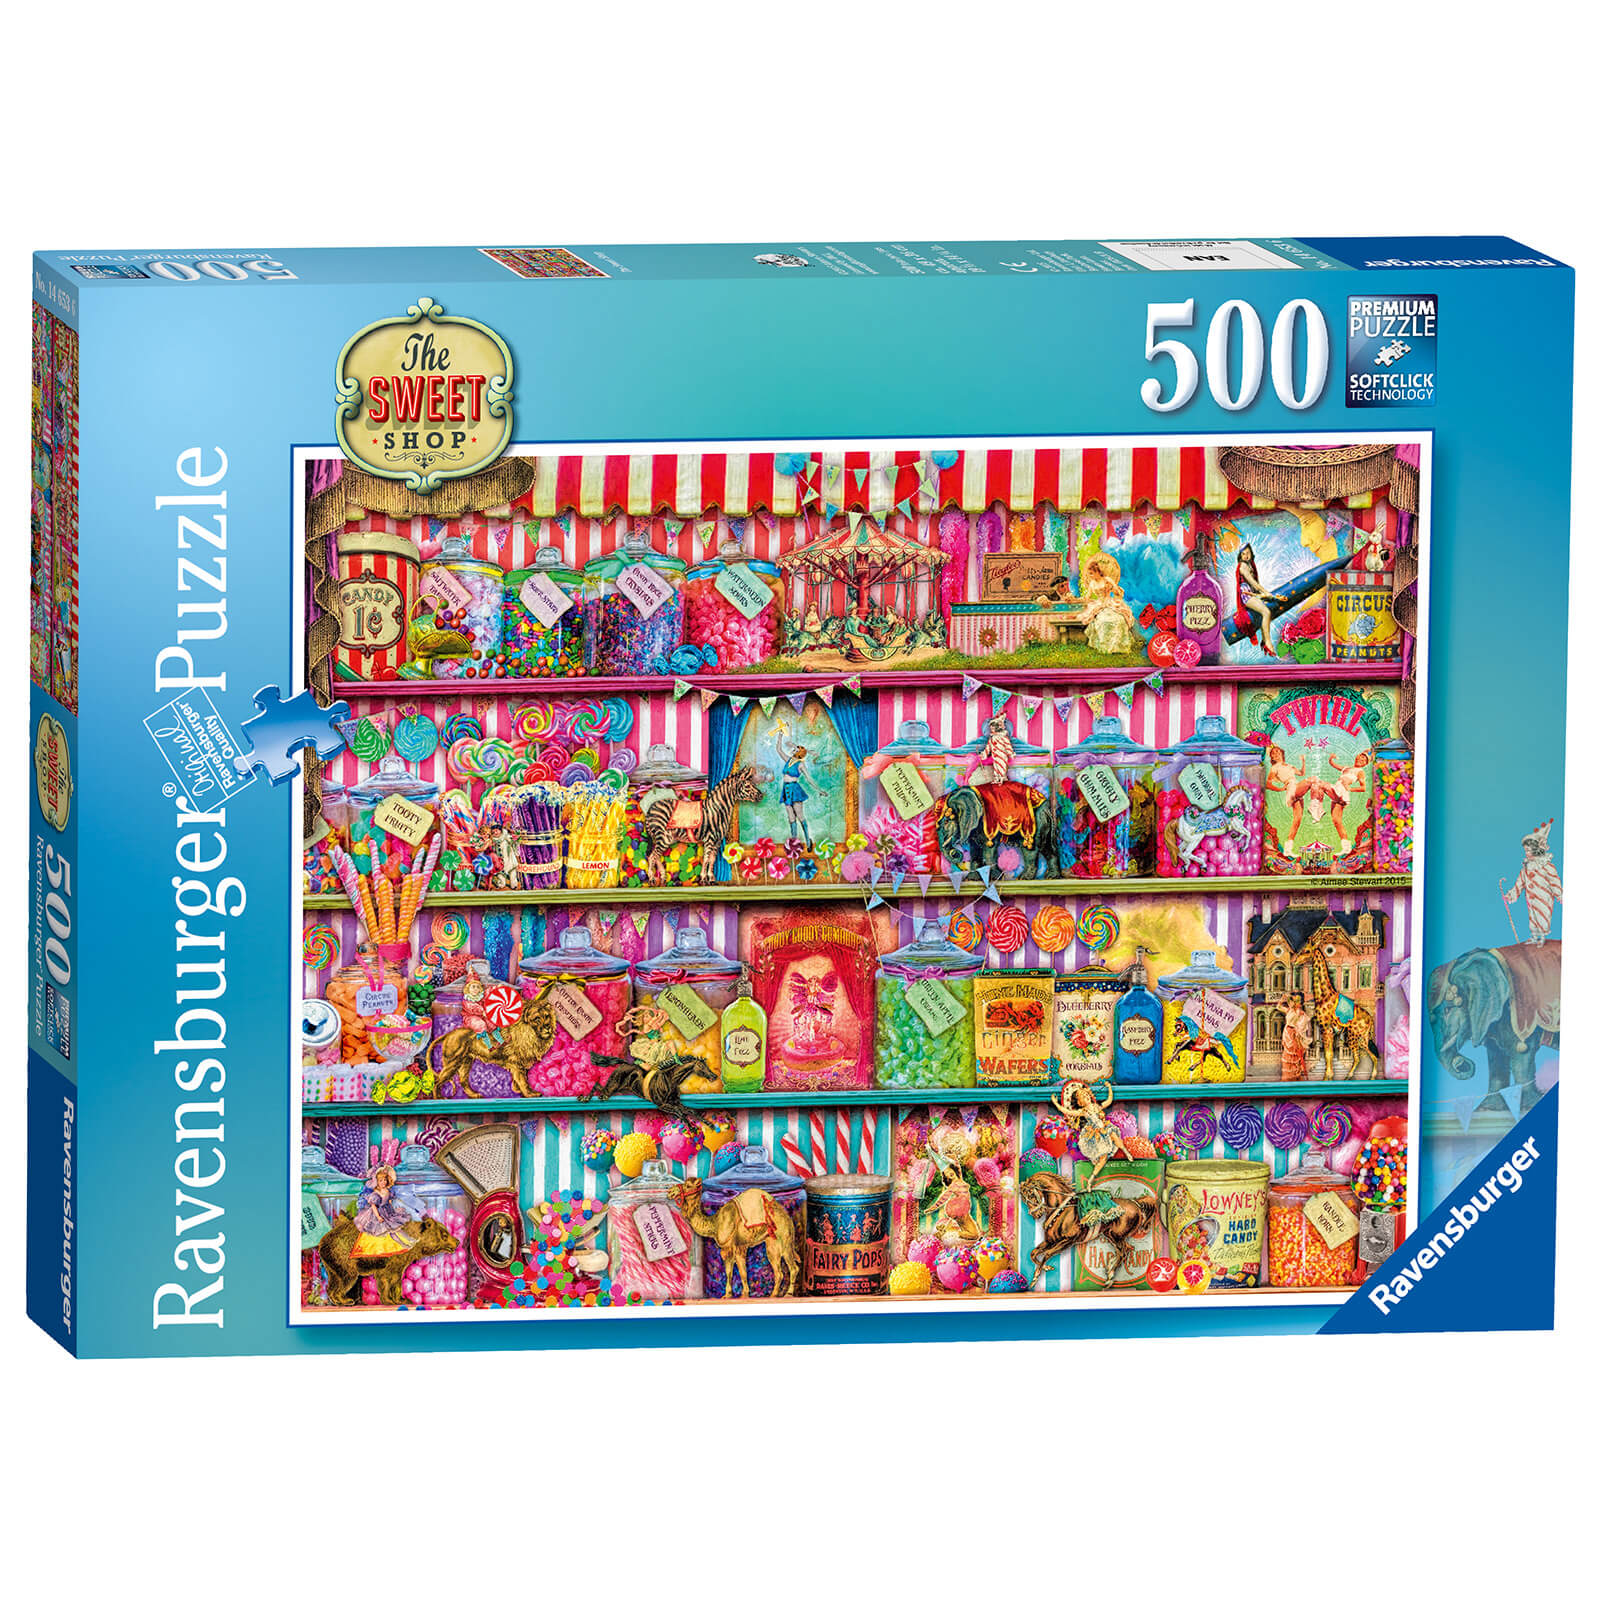 The Sweet Shop Jigsaw Puzzle (500 Pieces)